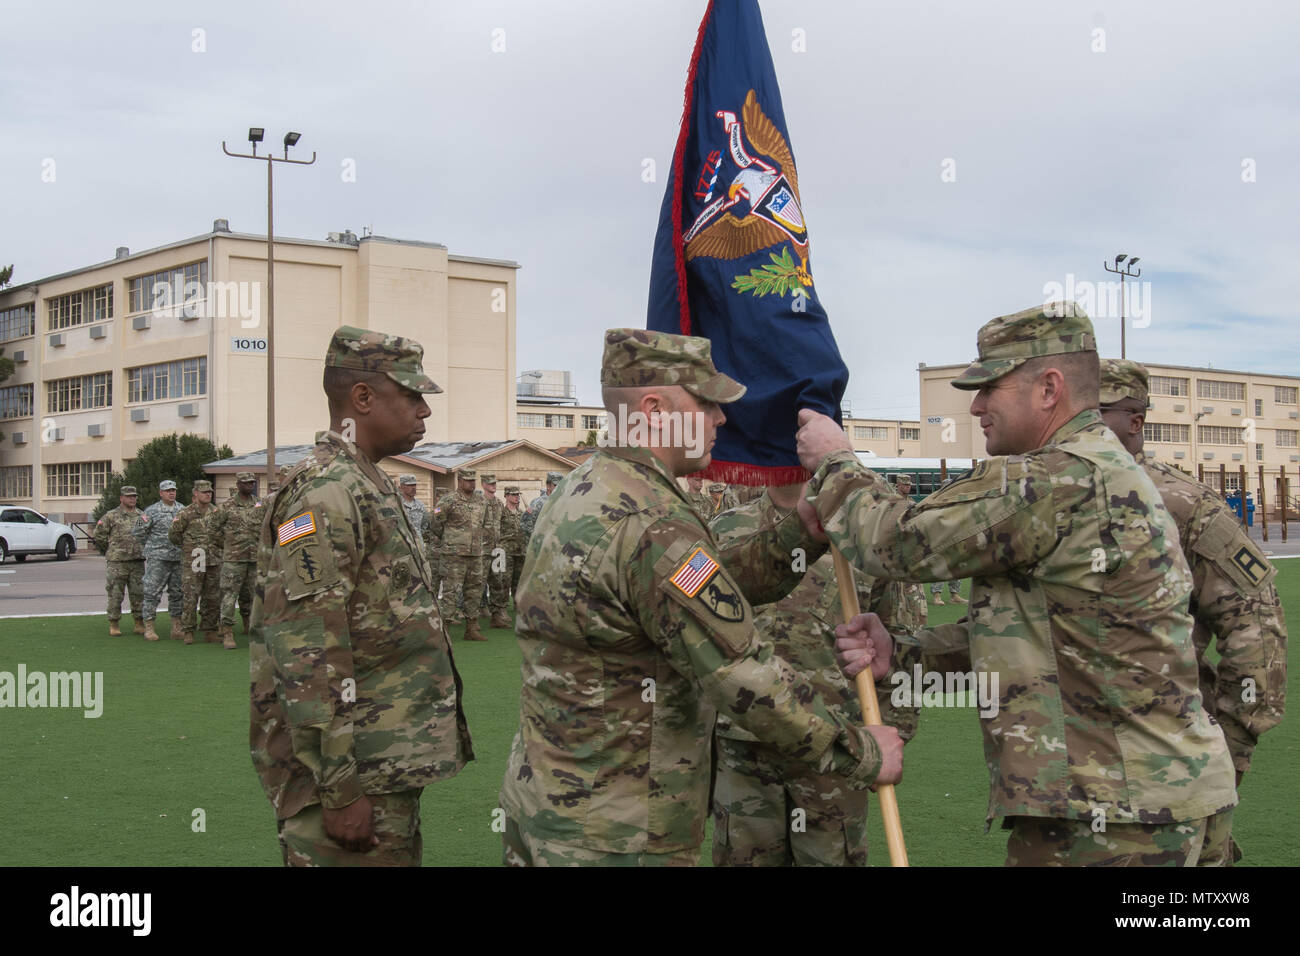 Col. Paul Garcia, the outgoing commander, presents Lt. Col. Michael Child, the incoming commander, the CRC colors representing the Transfer of Authority to the 1st Battalion, 304th Infantry Regiment, 4th Brigade of 98th Training Division (Initial Entry Training) at Fort Bliss, Texas, January 13, 2017. Stock Photo